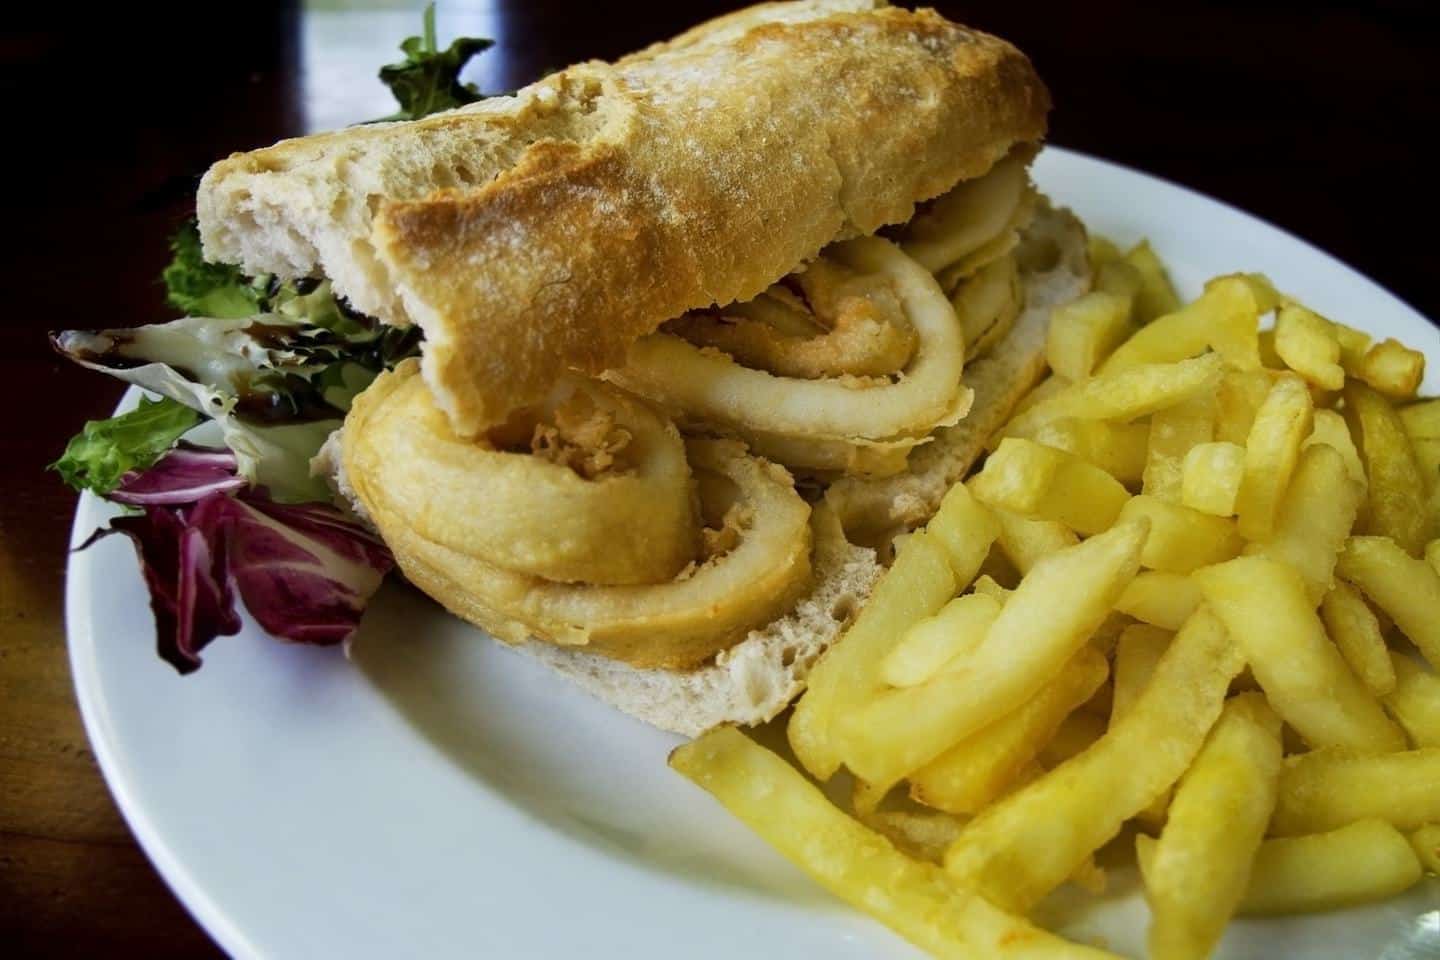 baguette sandwich with fried squid and a side of french fries